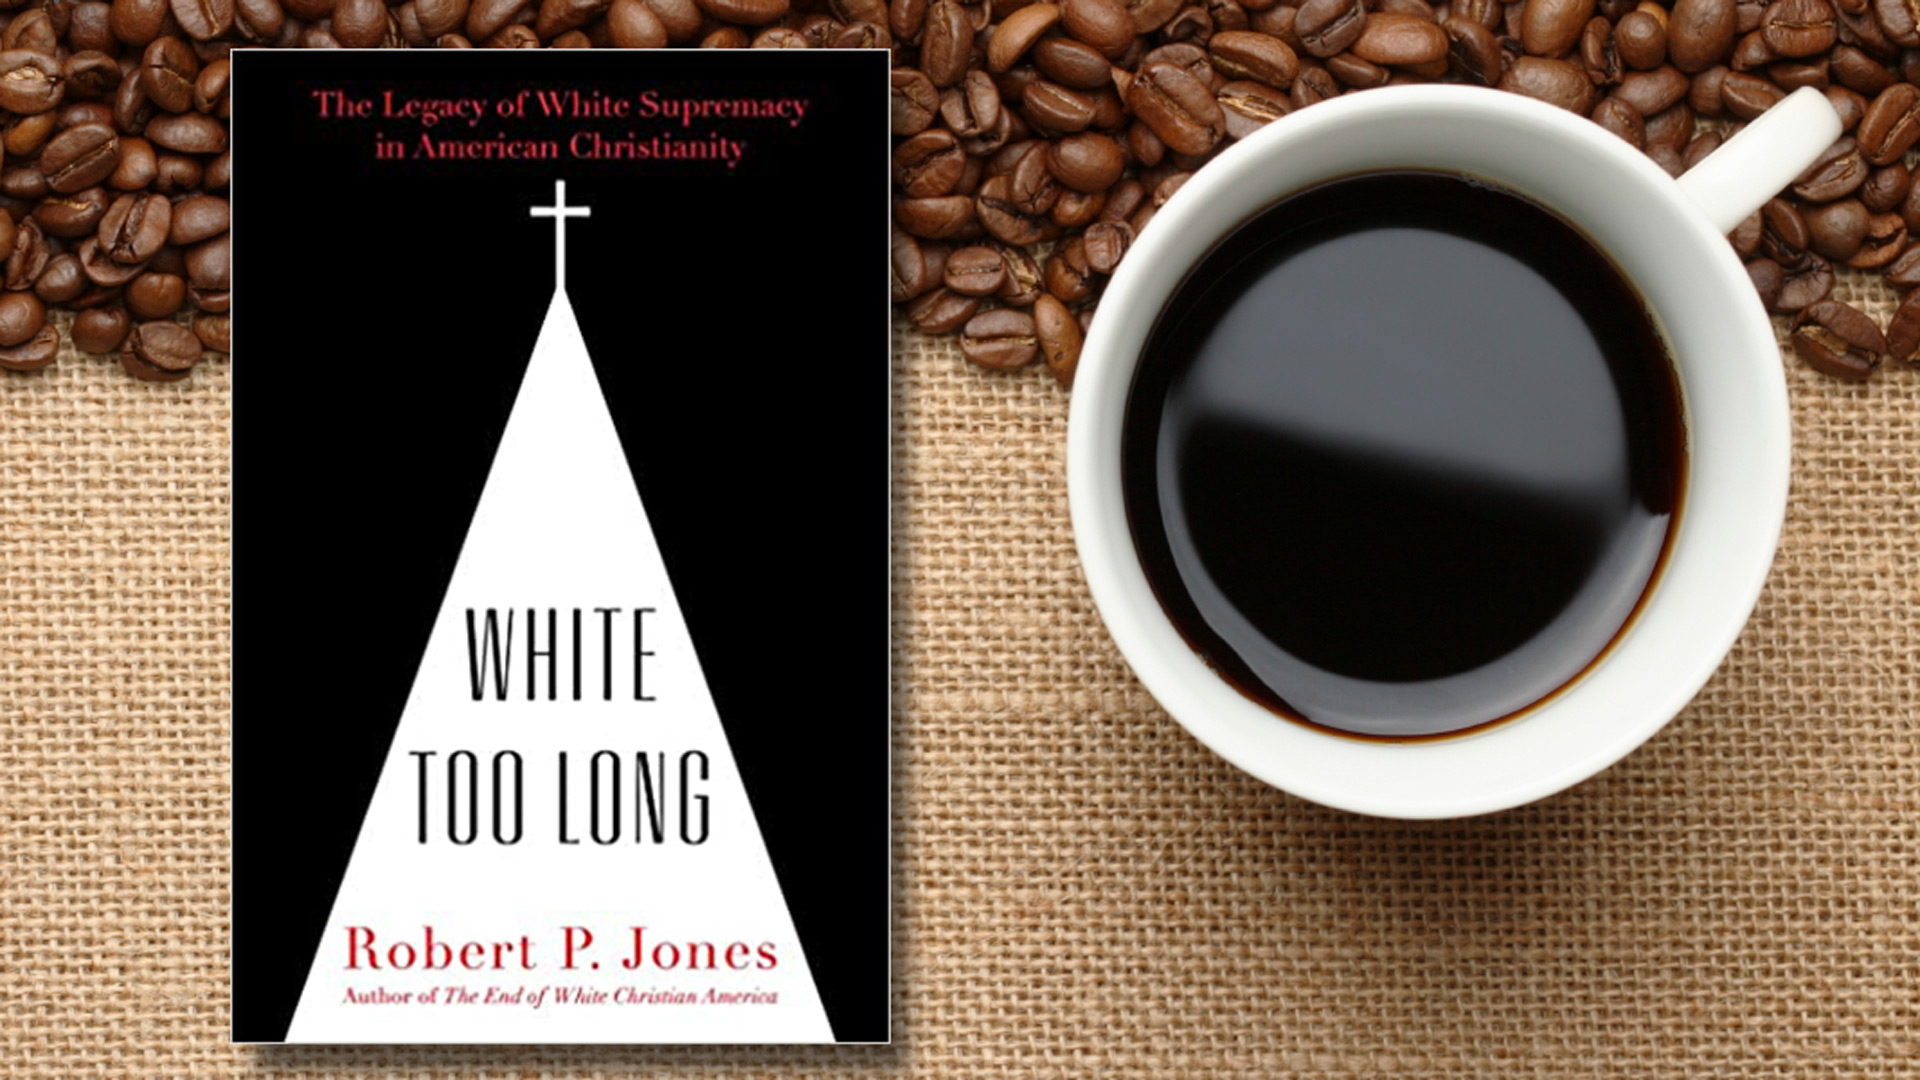 Theology, Thoughts & Coffee 
Book Study: White Too Long by Robert P. Jones
